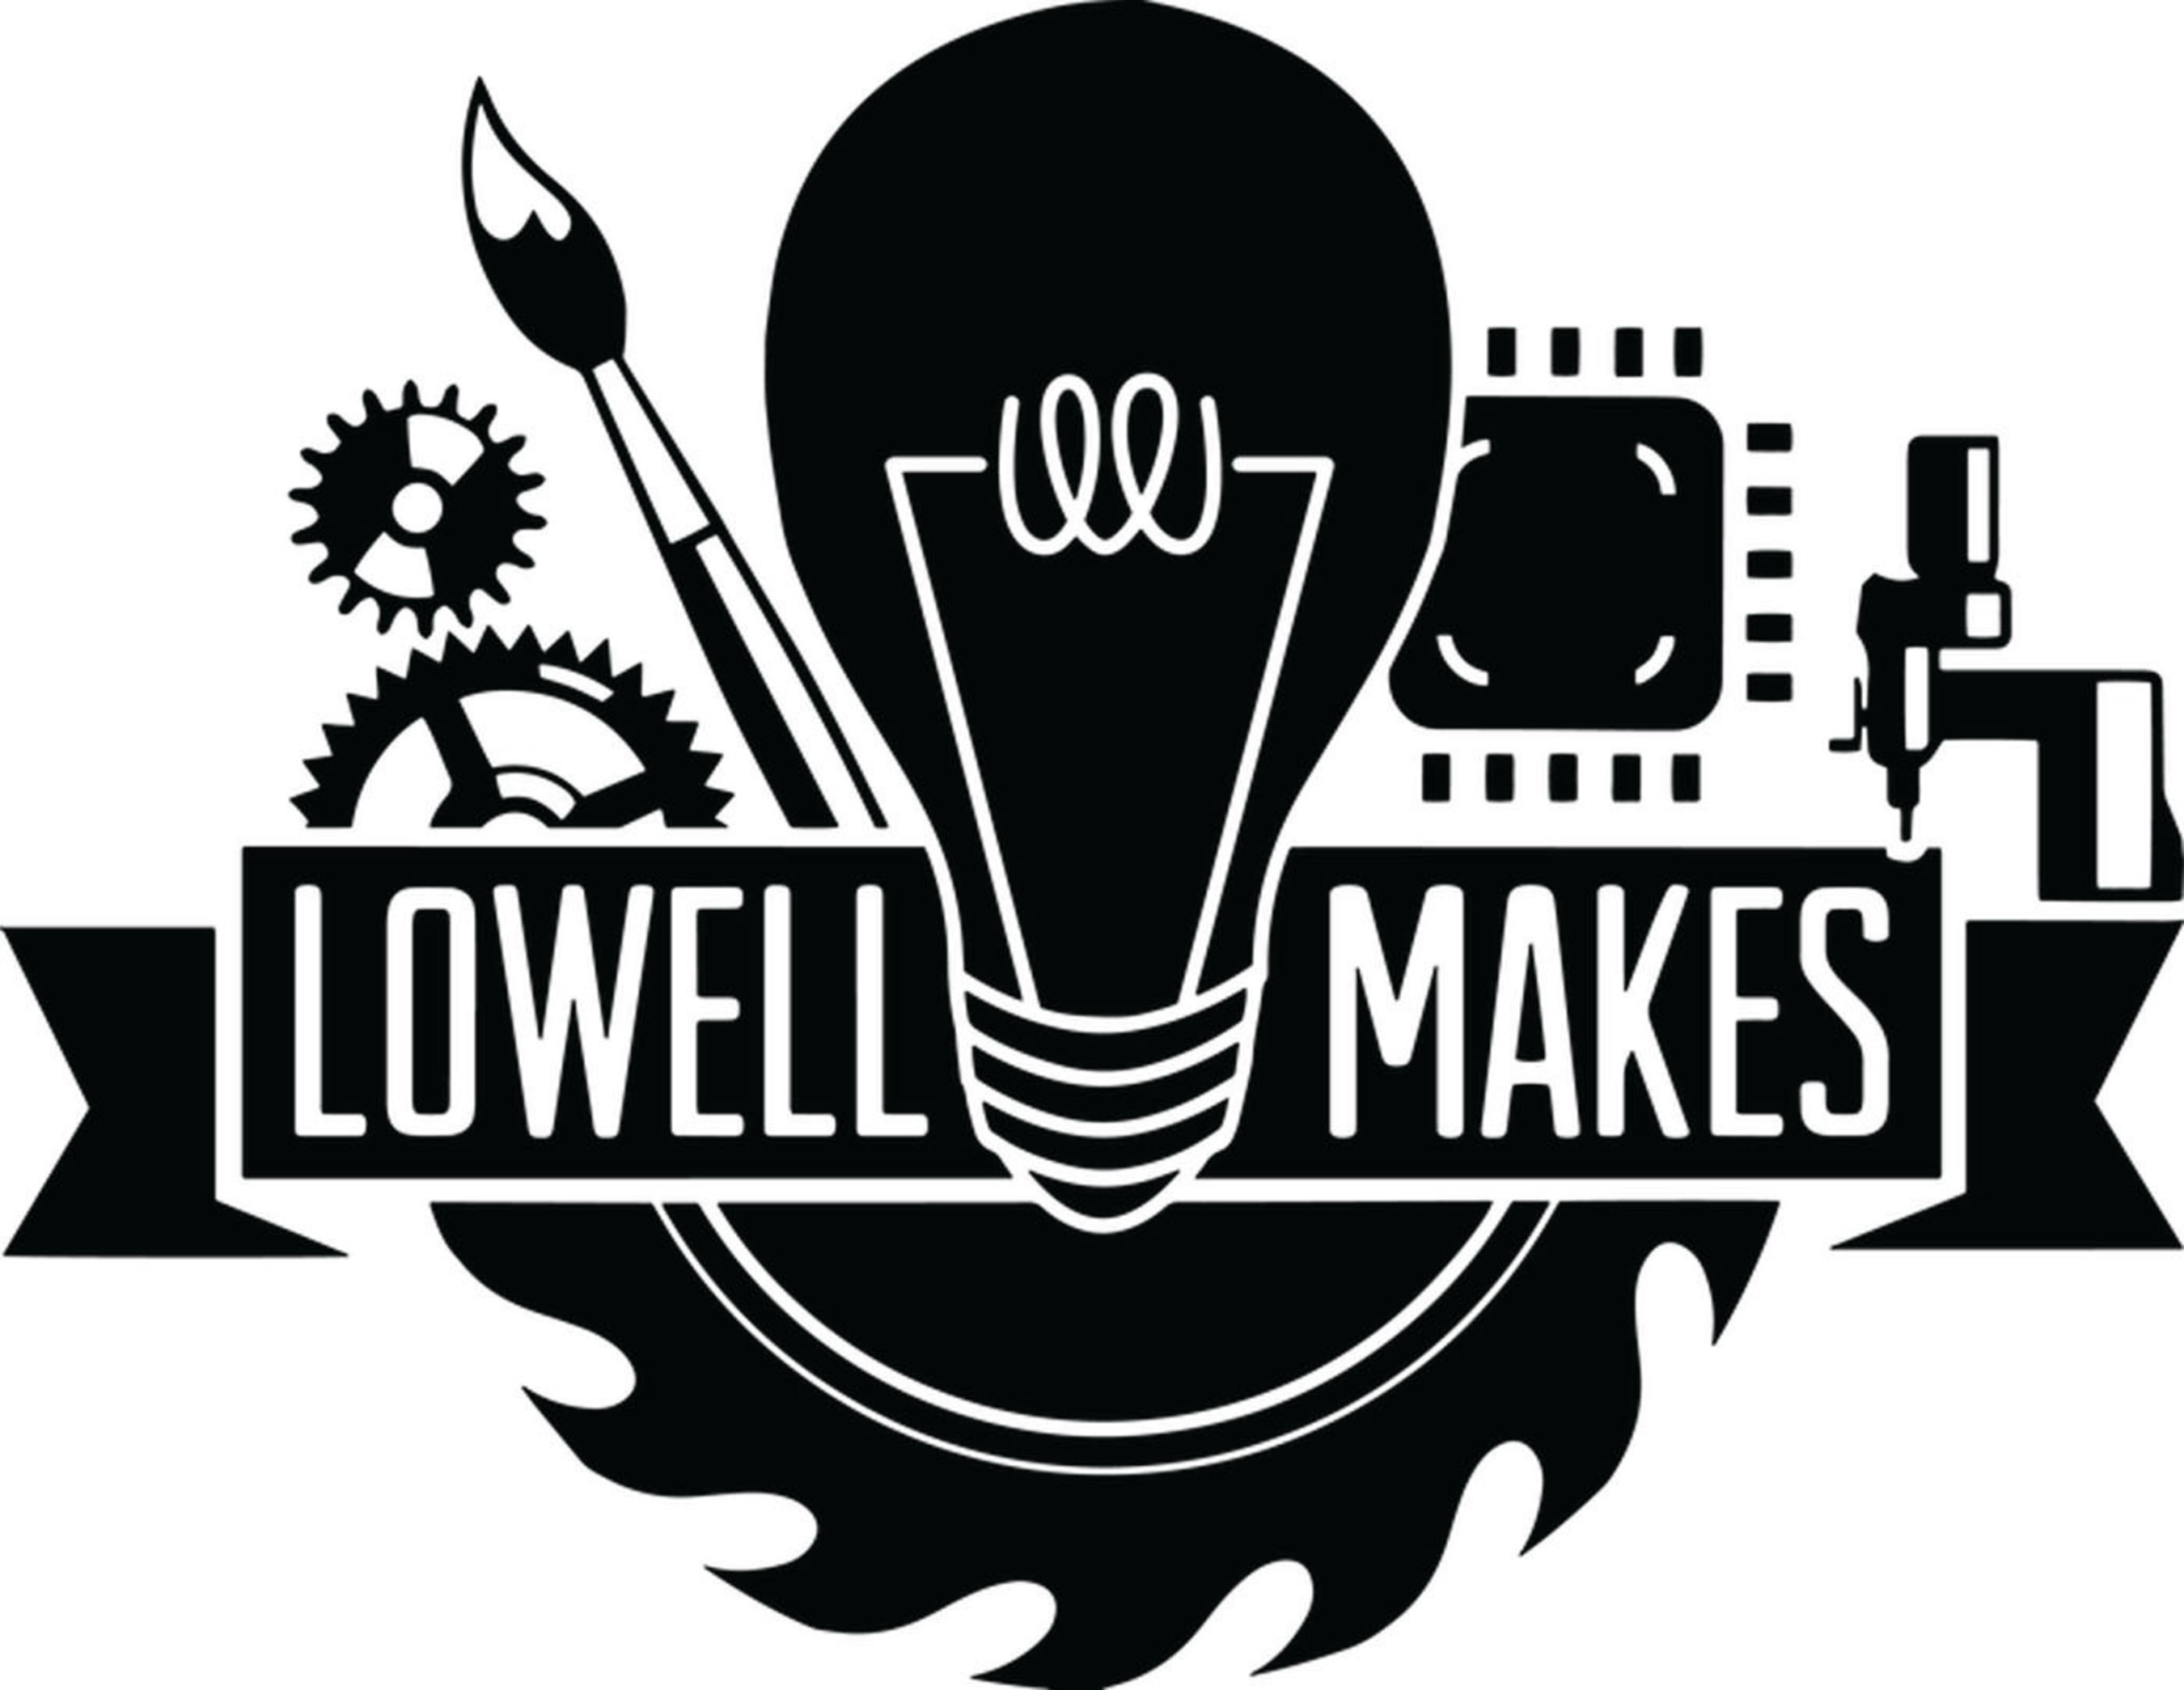 Lowell Makes. (PRNewsFoto/Lowell Makes) (PRNewsFoto/LOWELL MAKES)